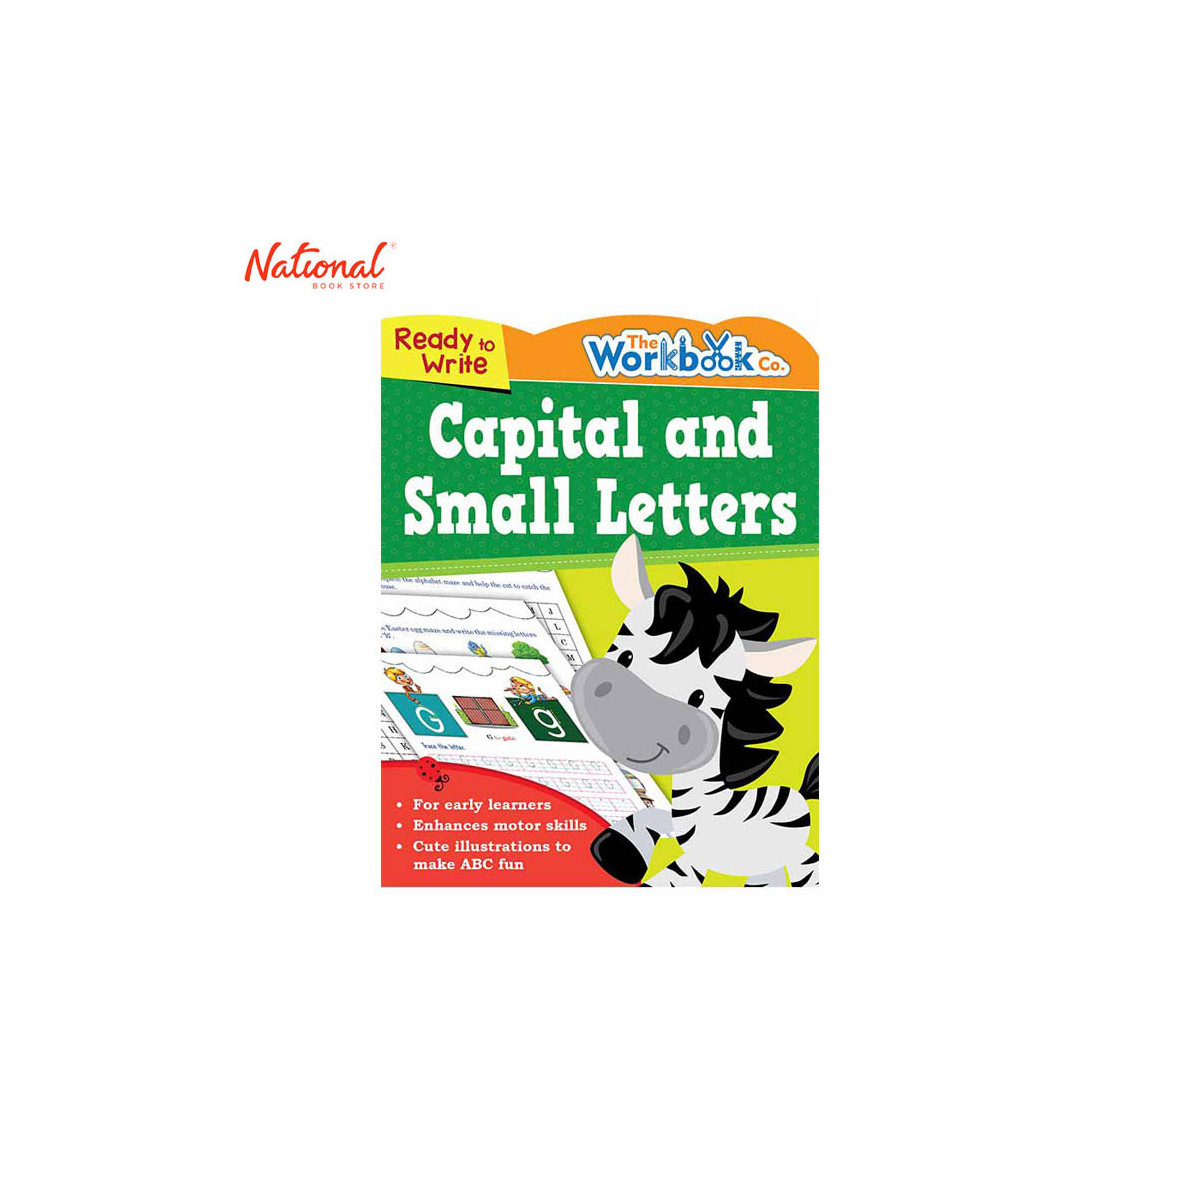 Capital & Small Letters Trade Paperback by Pegasus